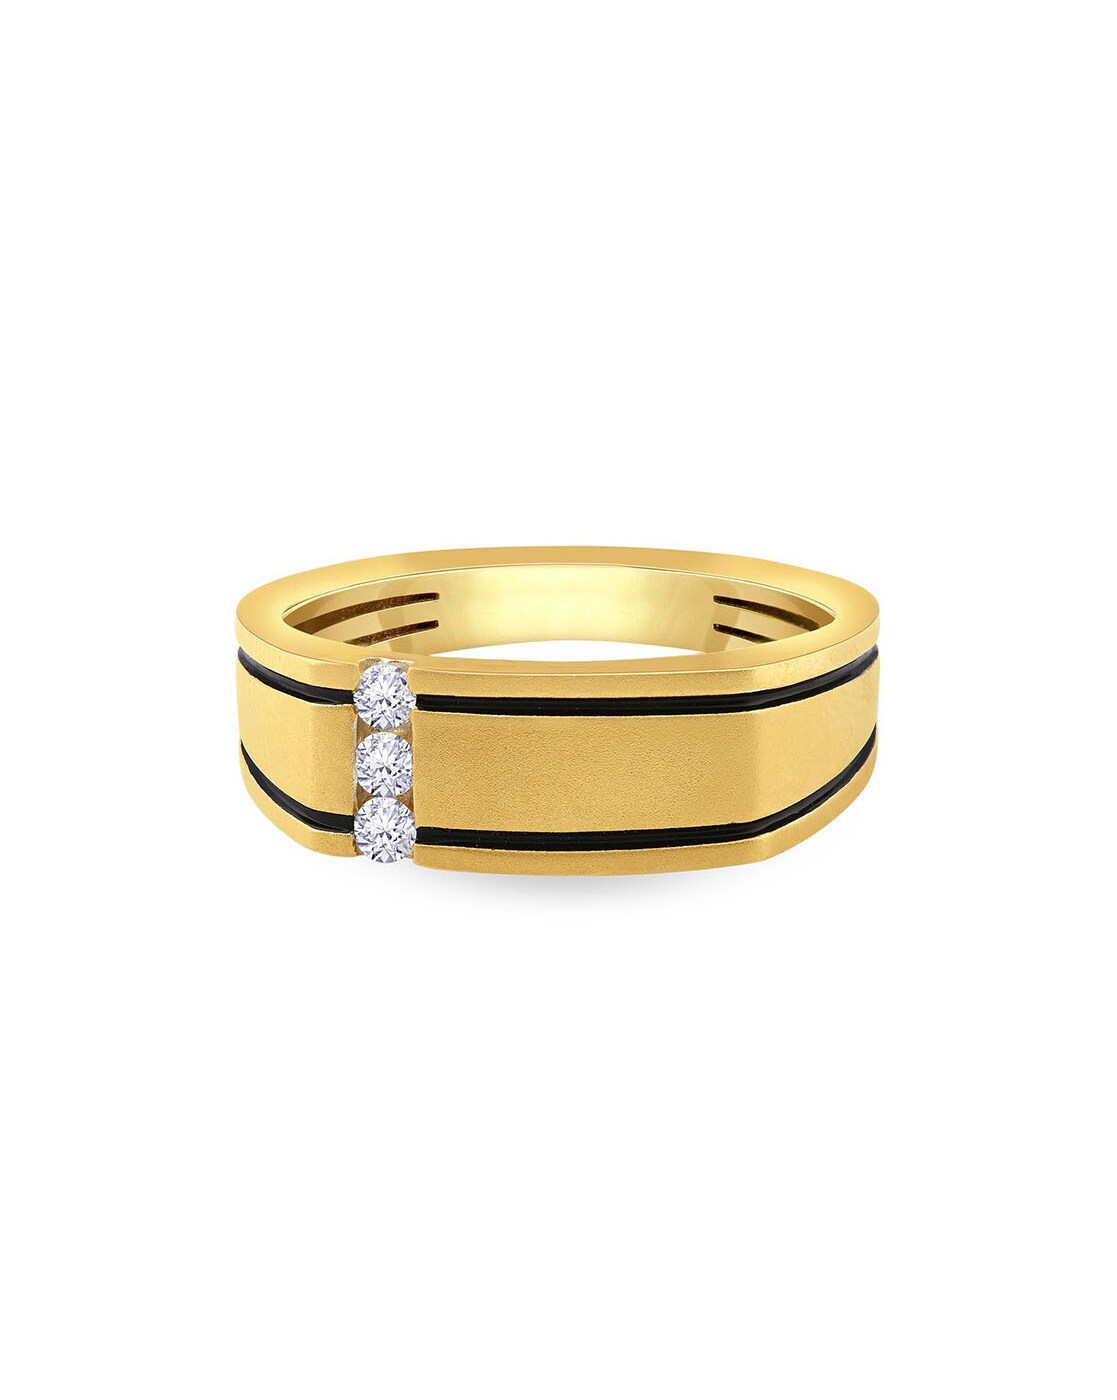 Buy Malabar Gold and Diamonds 22 KT (916) purity Yellow Gold Malabar Gold  Ring FRGEDZRURGW744_Y_18 for Men at Amazon.in